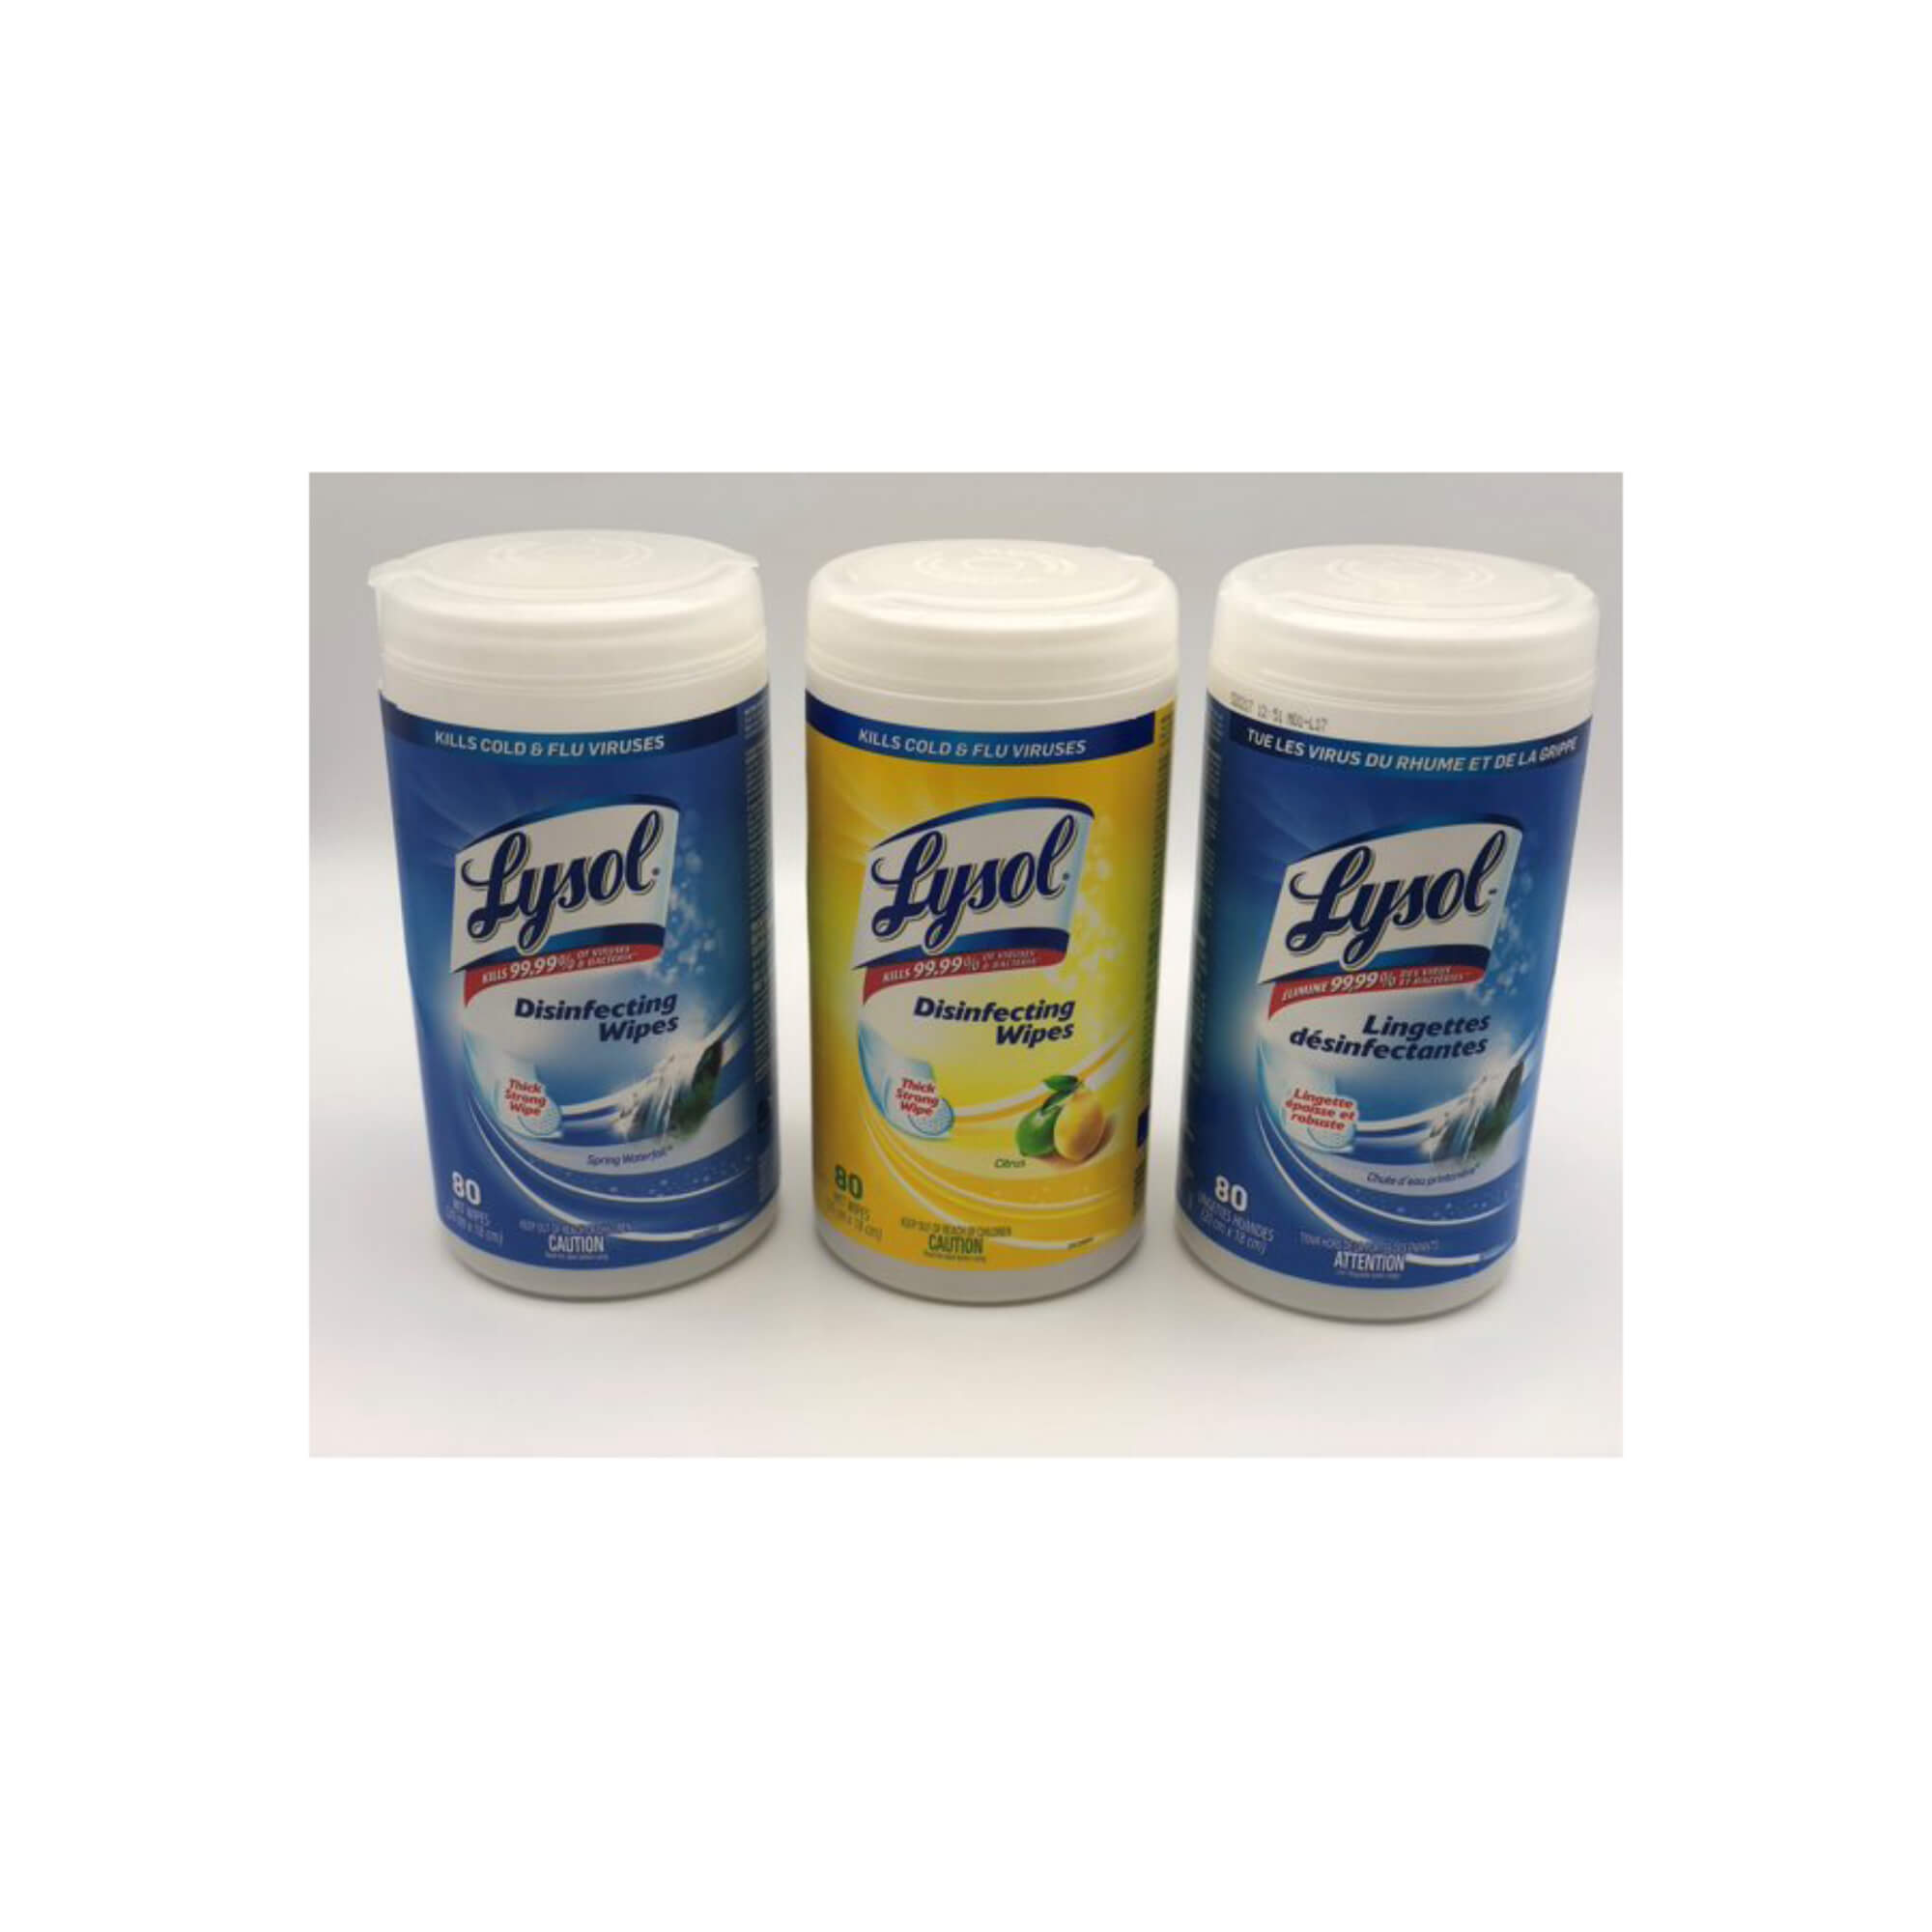 Lysol Two Spring 80 Count Disinfecting Wipes 3 Pack